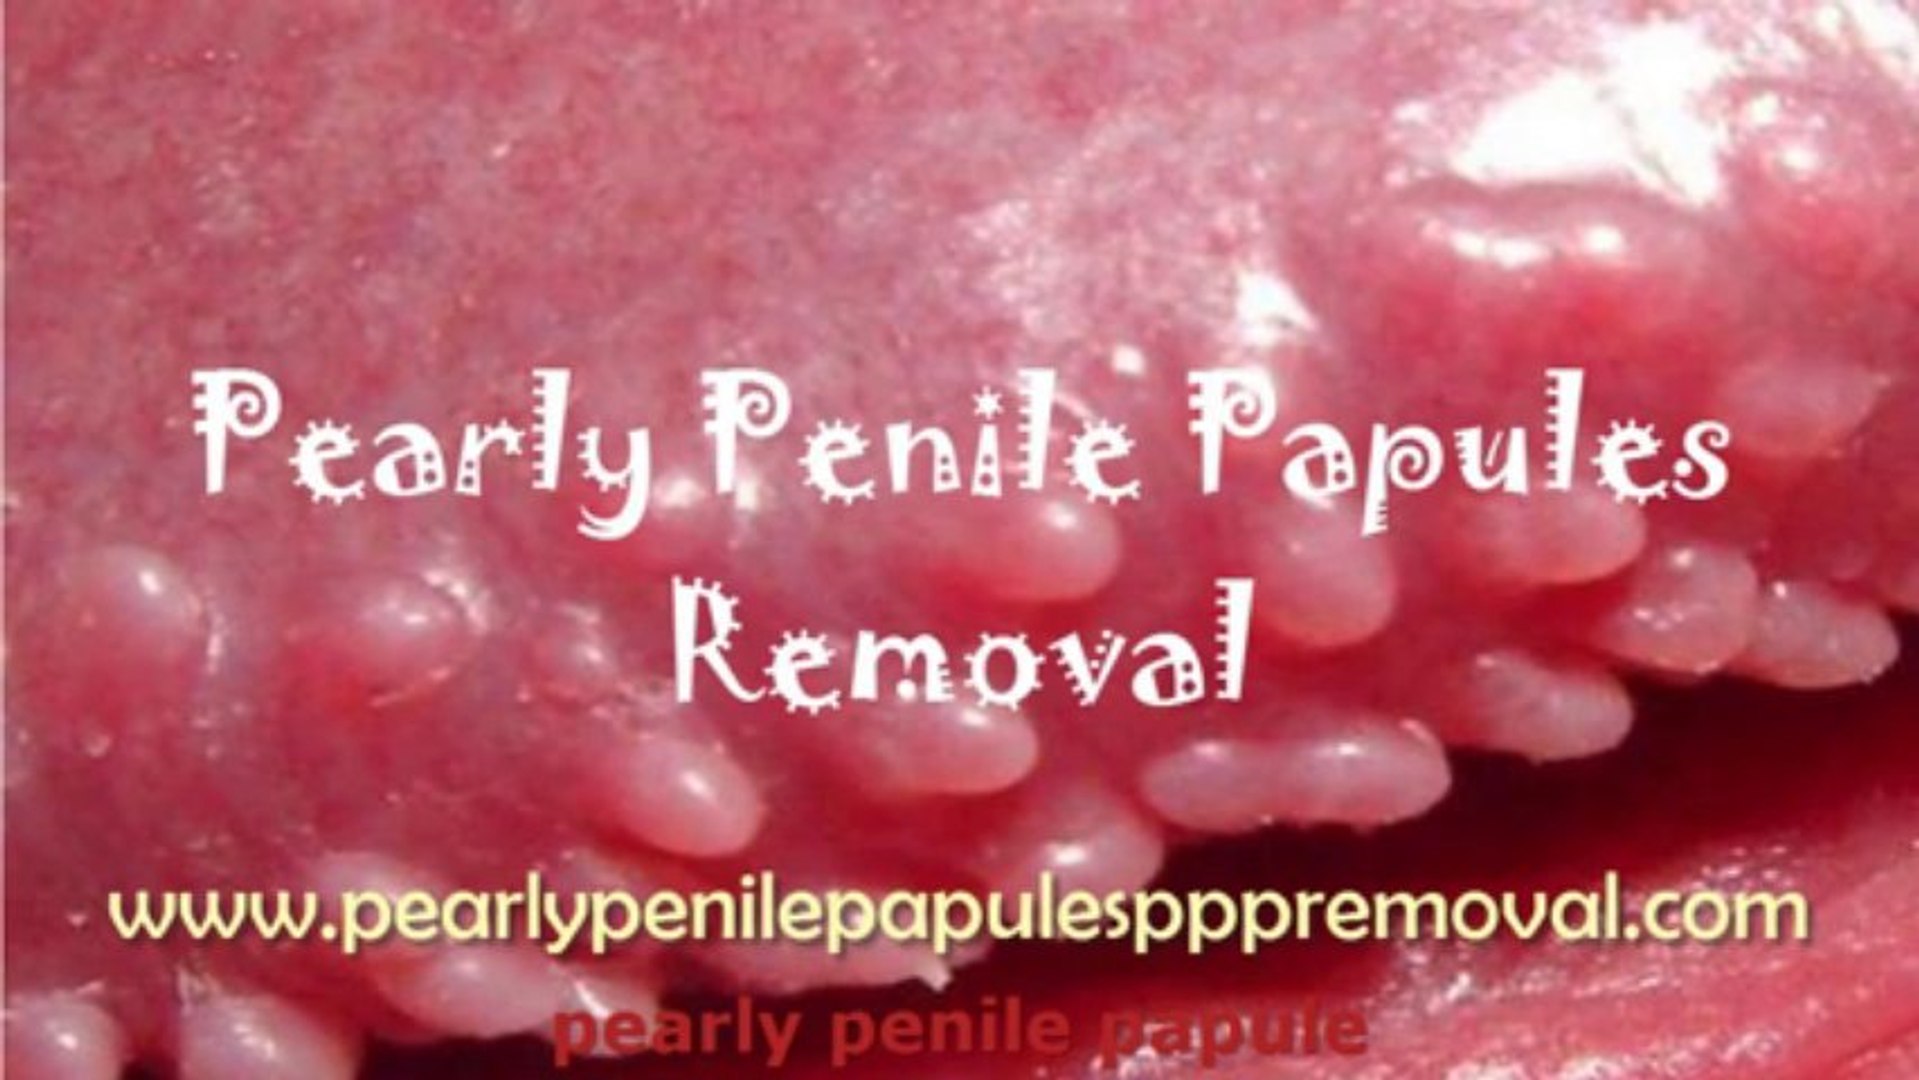 Penile papules how to naturally remove pearly PPP: Pearly